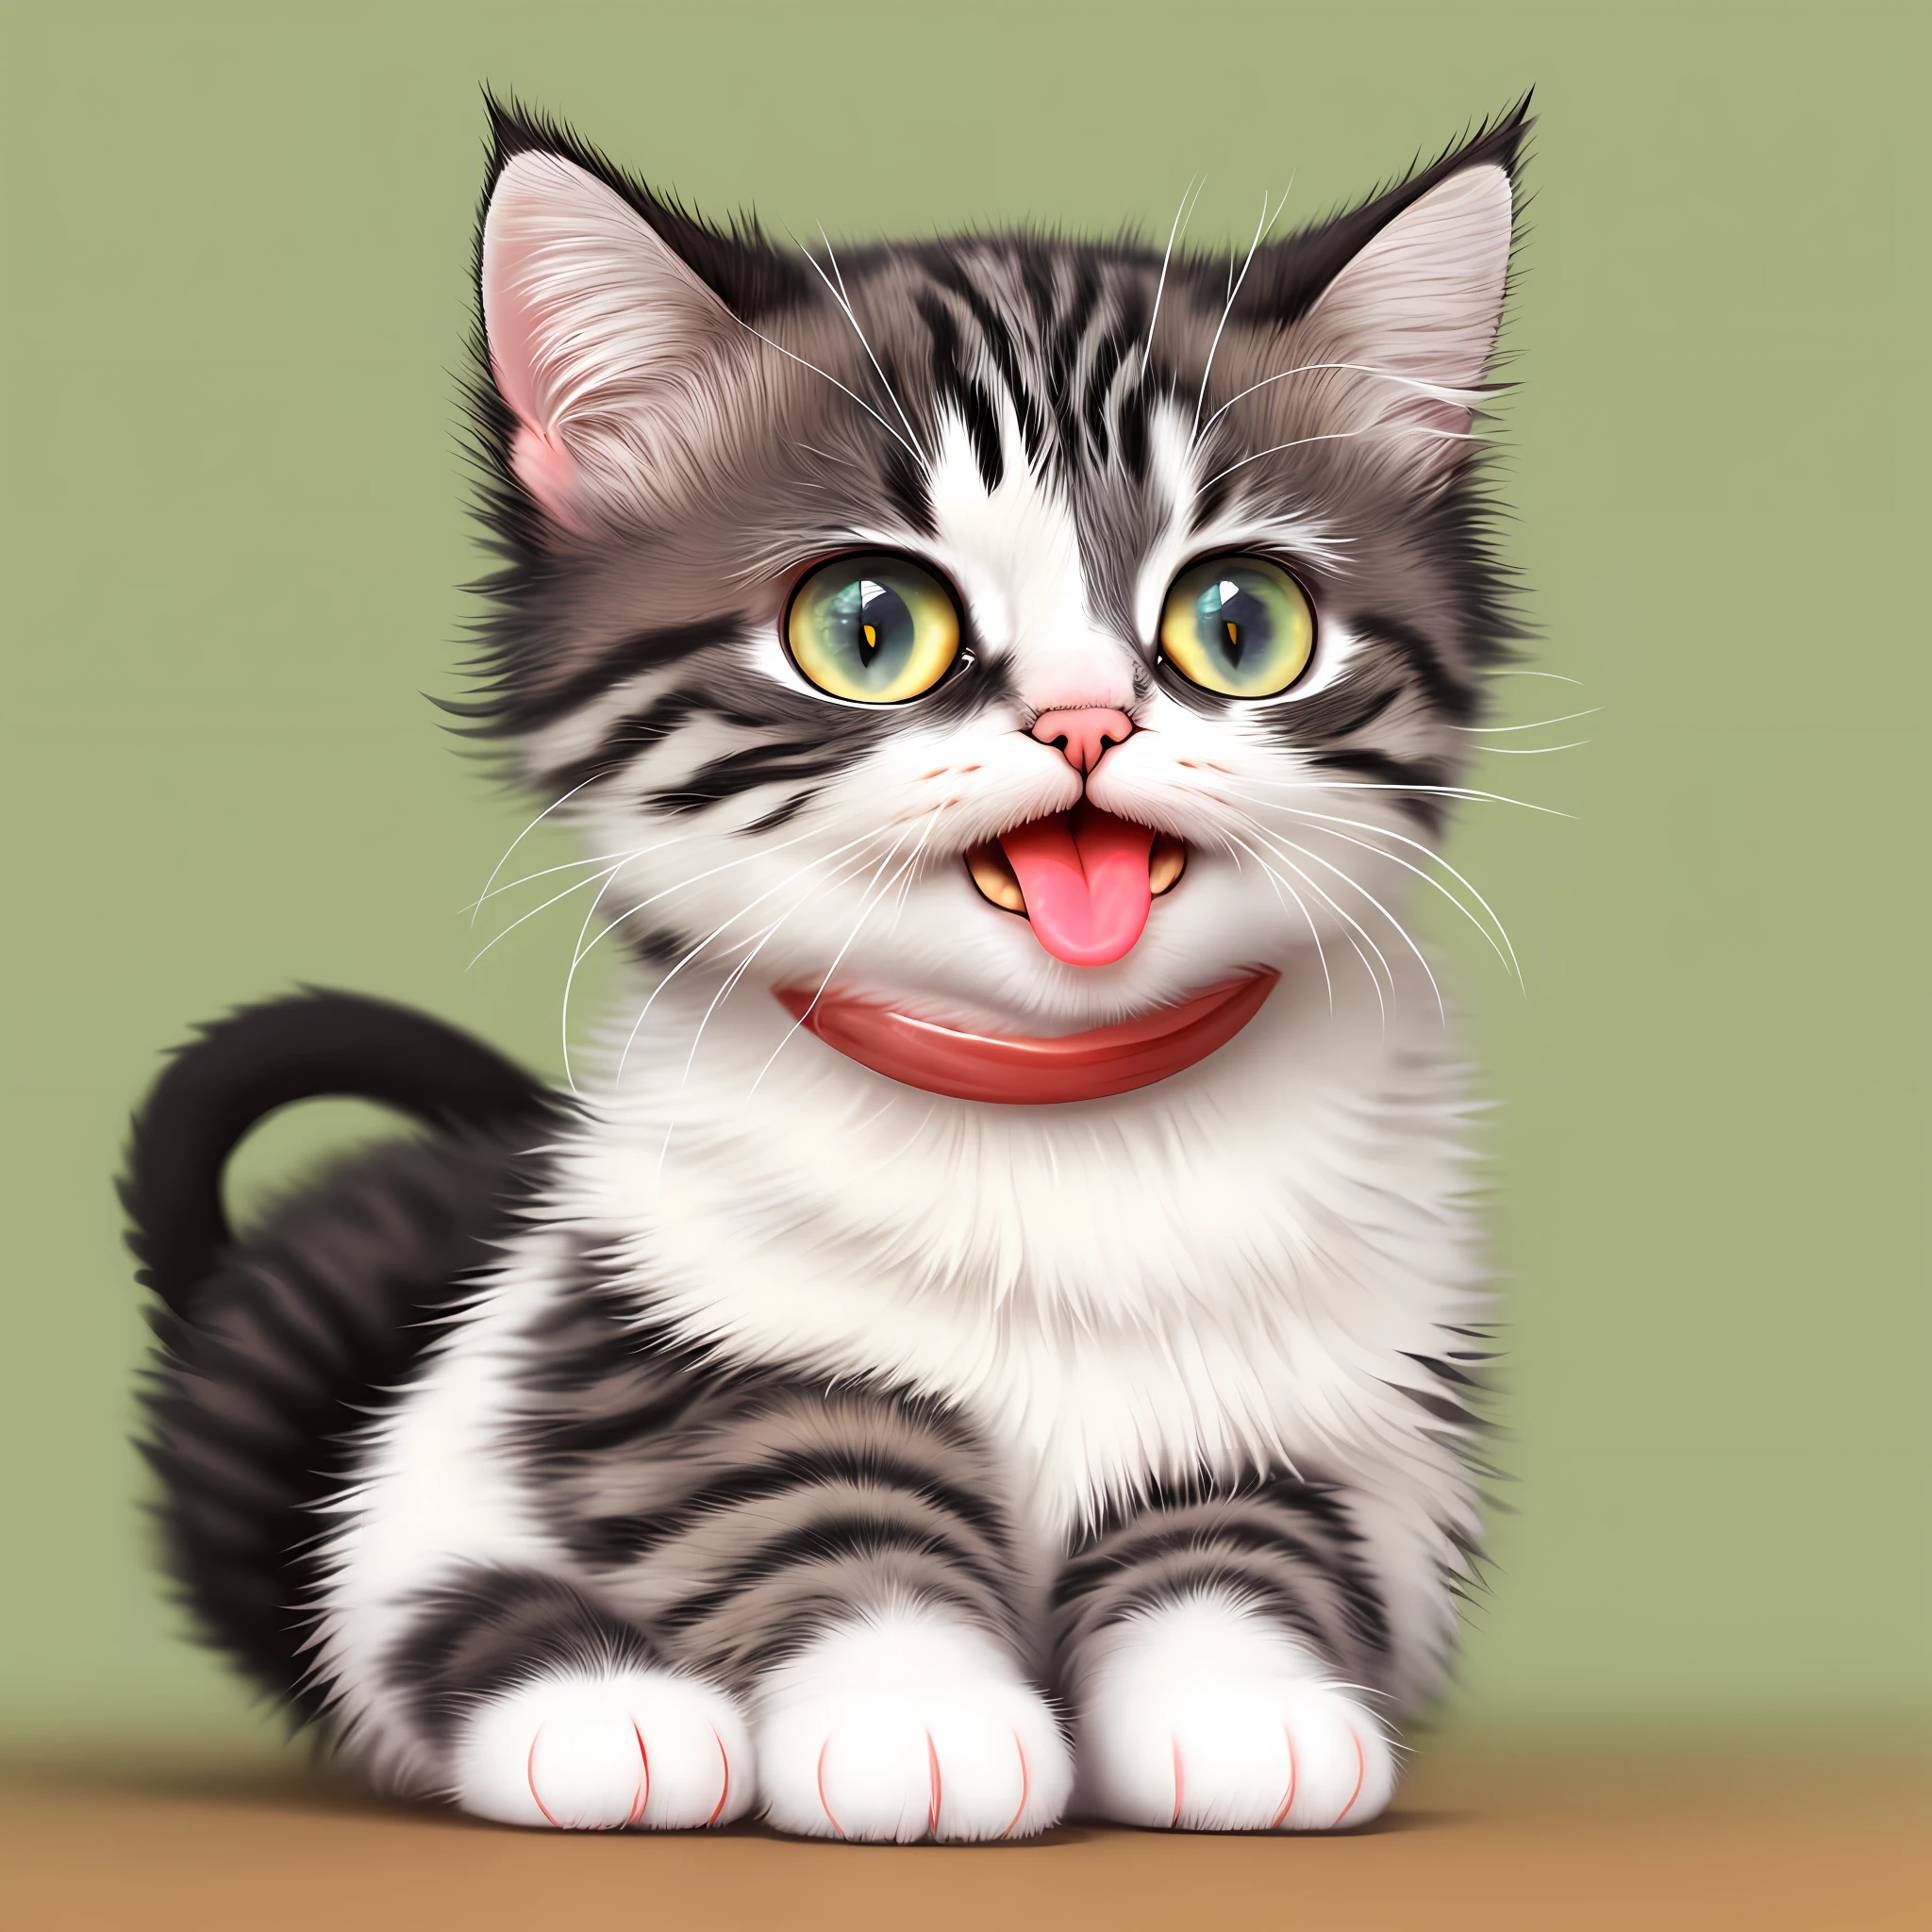 There's a cat that's sitting with its tongue sticking out, adorable digital paint, cute cat, miming